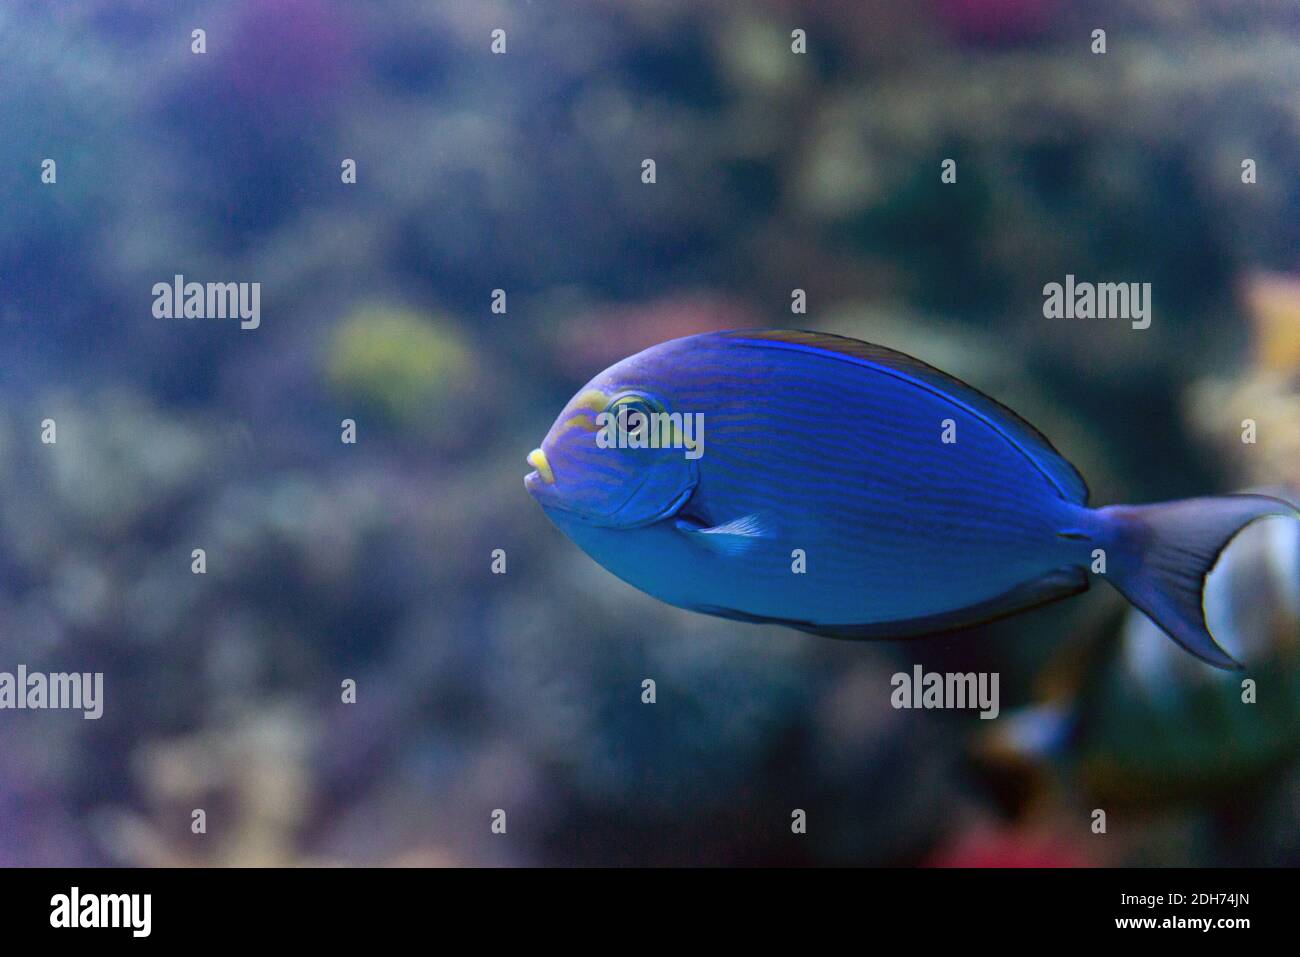 Yellowfin surgeonfish or Acanthurus xanthopterus underwater in the tropical waters of the Indian ocean. Stock Photo